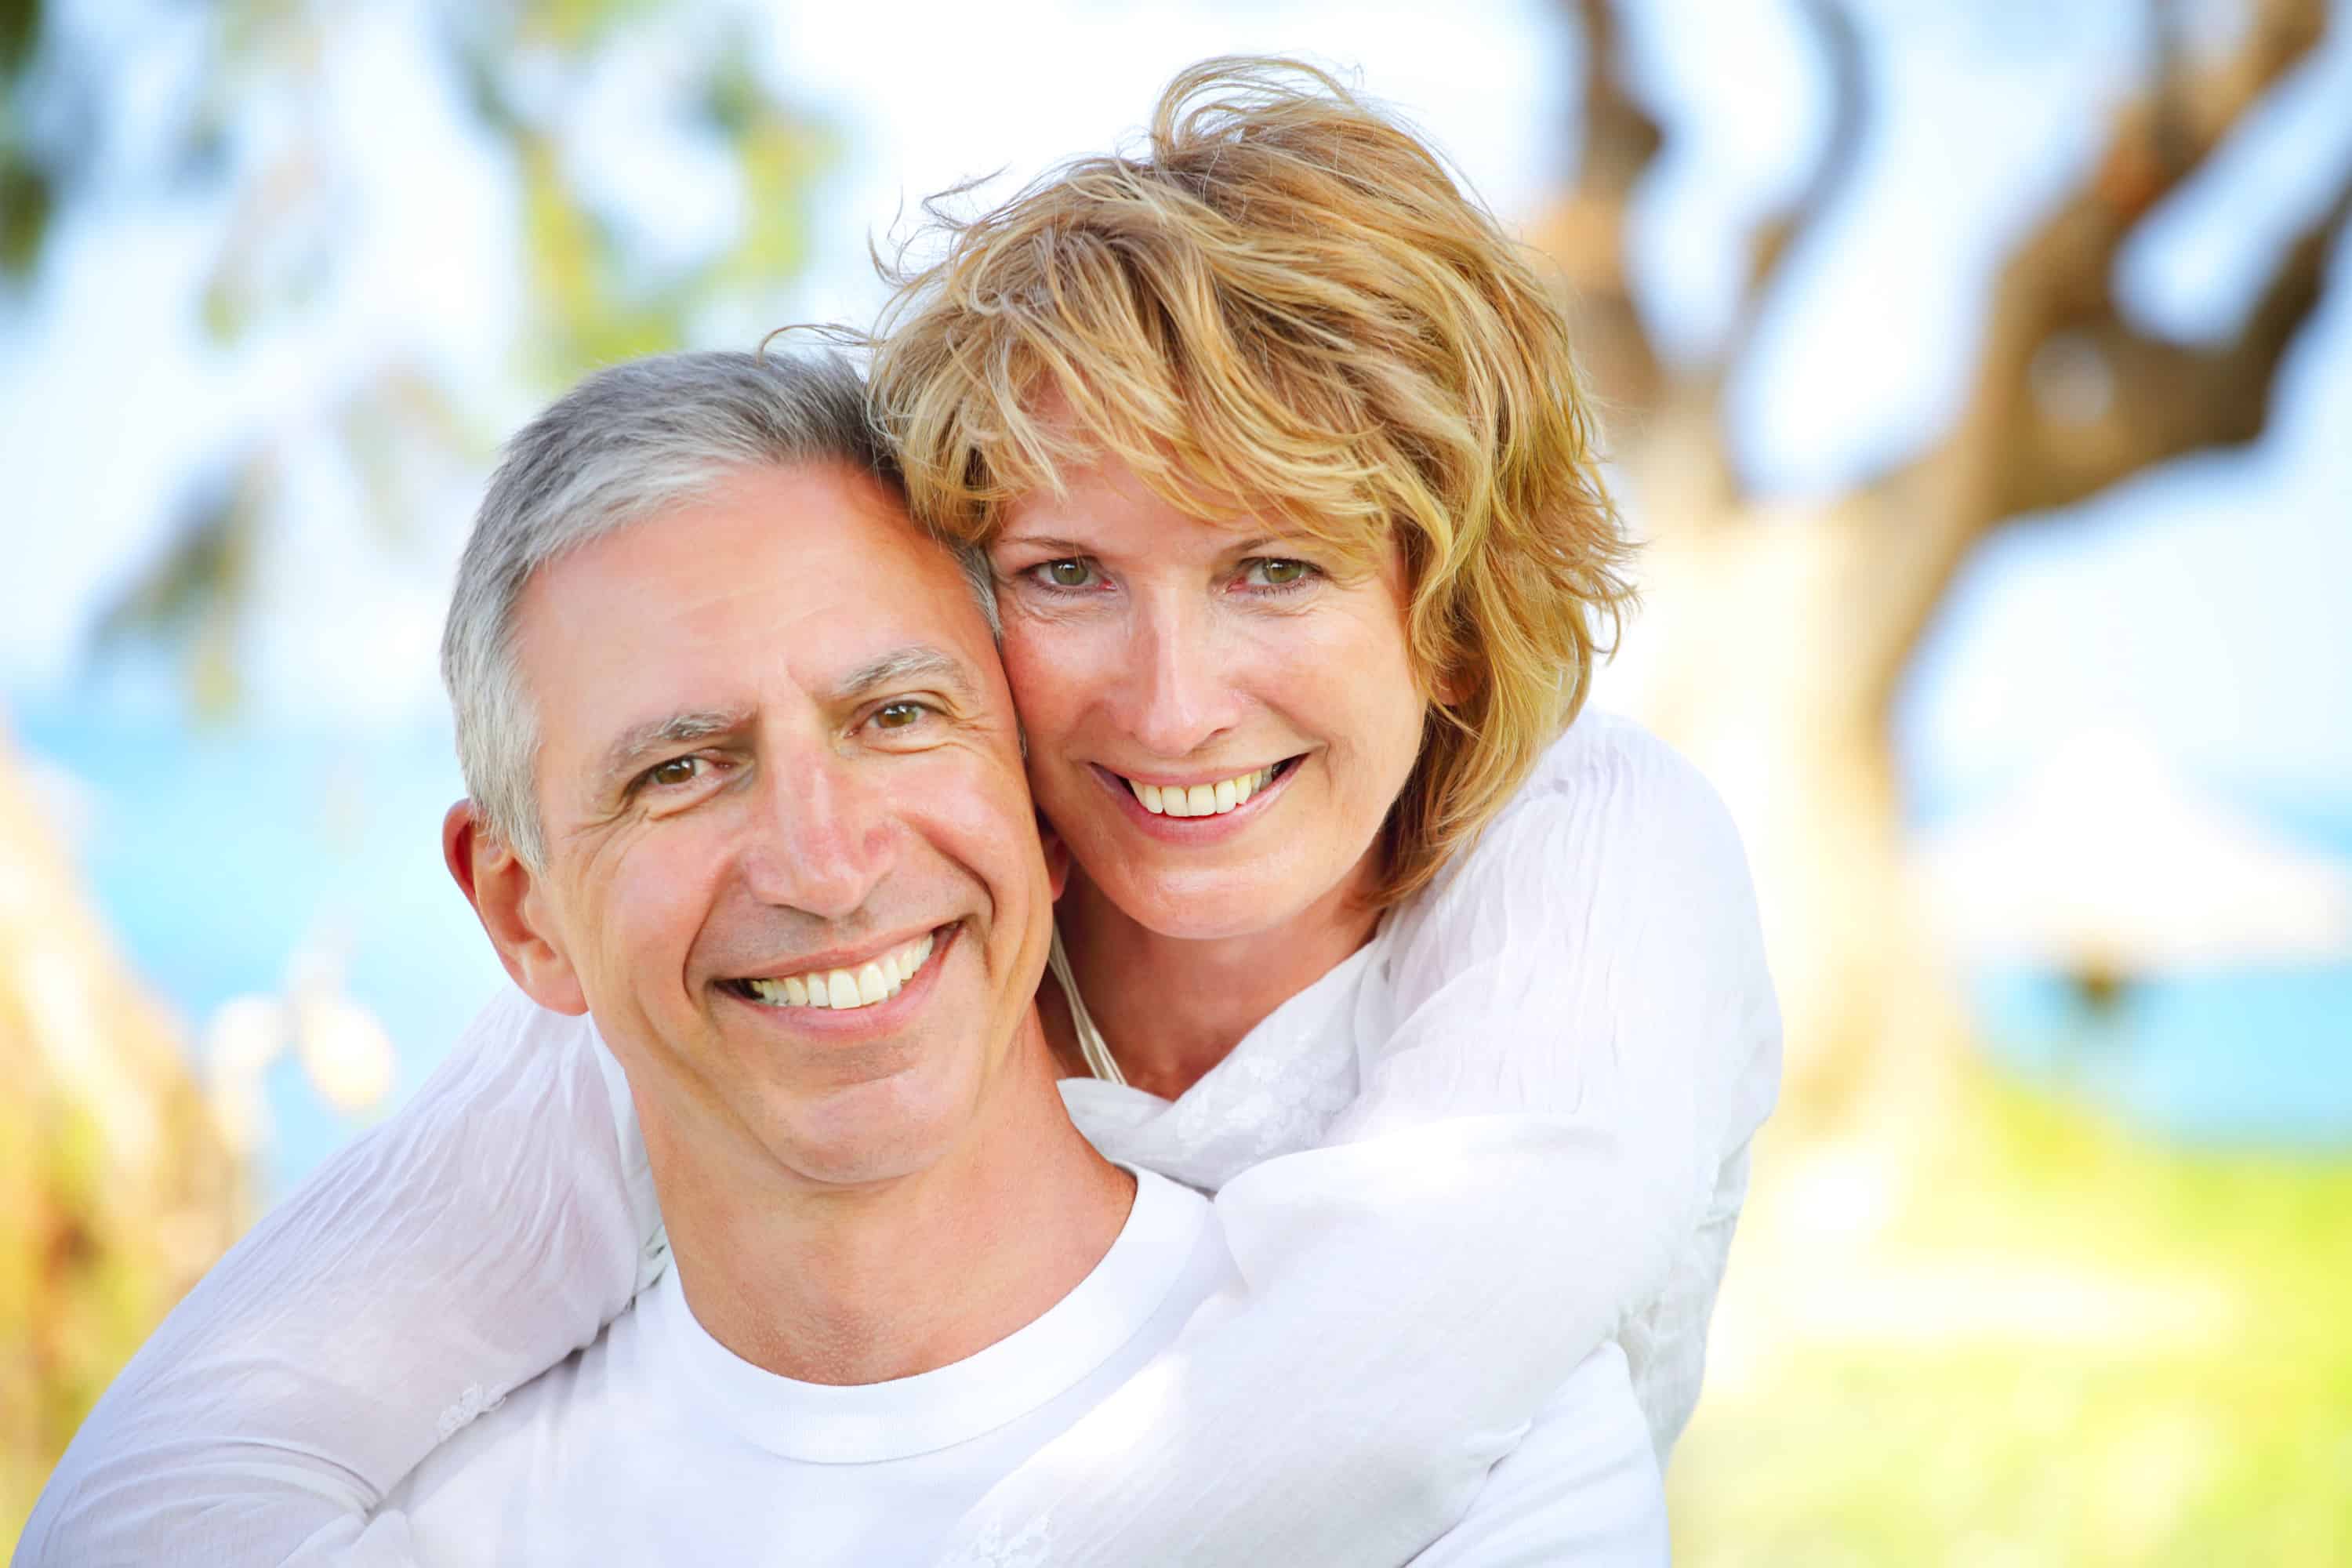 implants vs dentures pros and cons